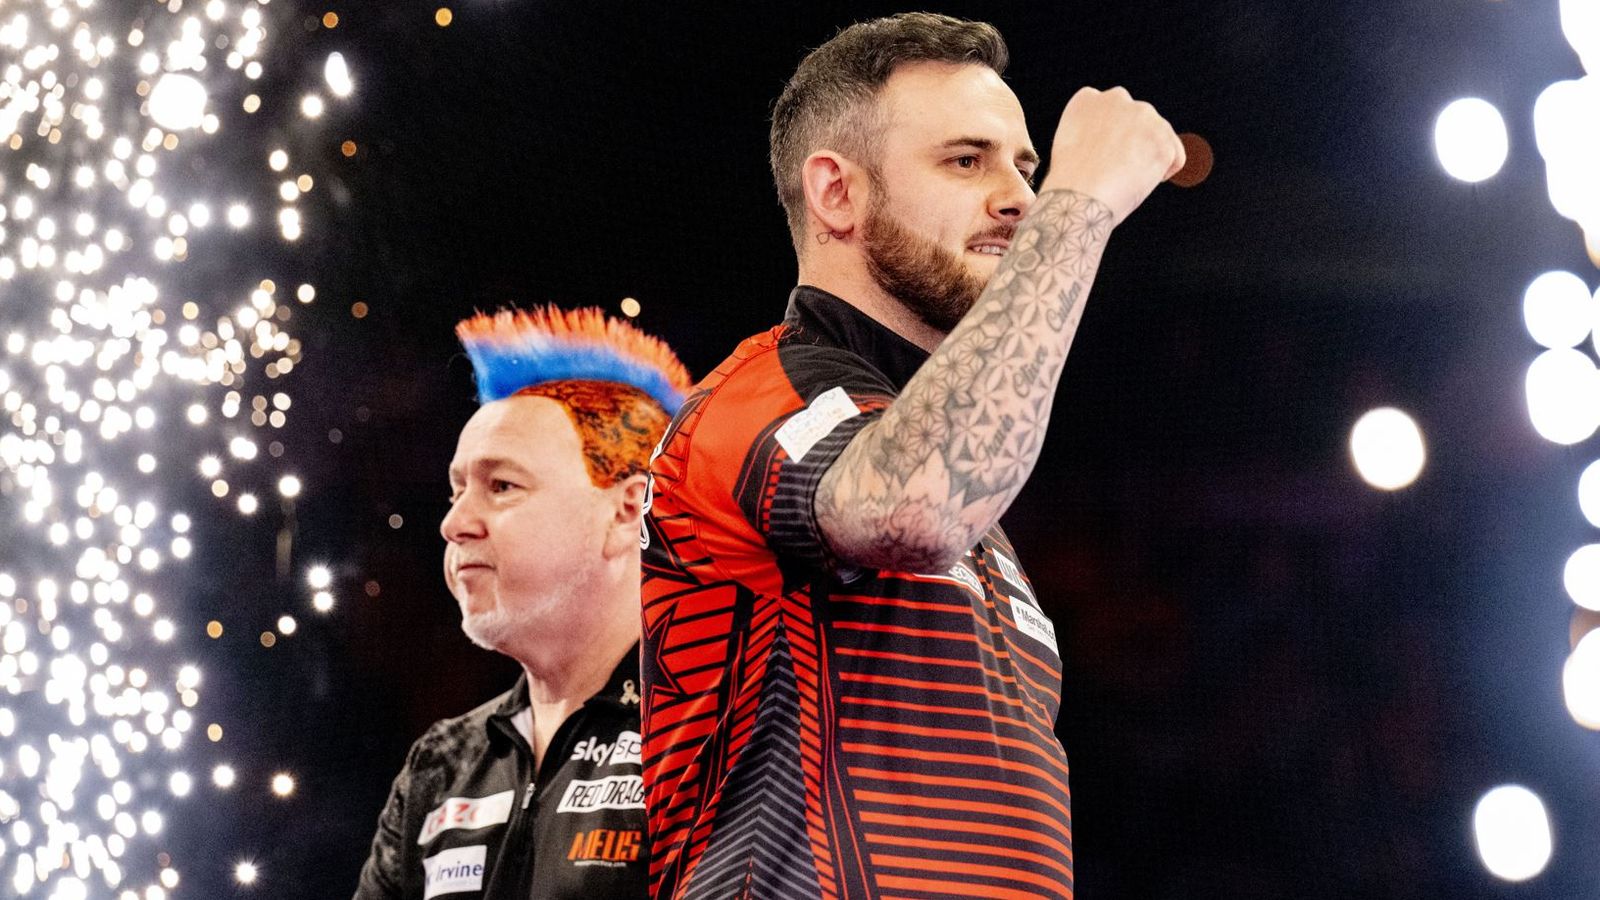 Premier League Darts LIVE: Joe Cullen and Peter Wright battle it out for a play-off spot at Newcastle’s Utilita Arena